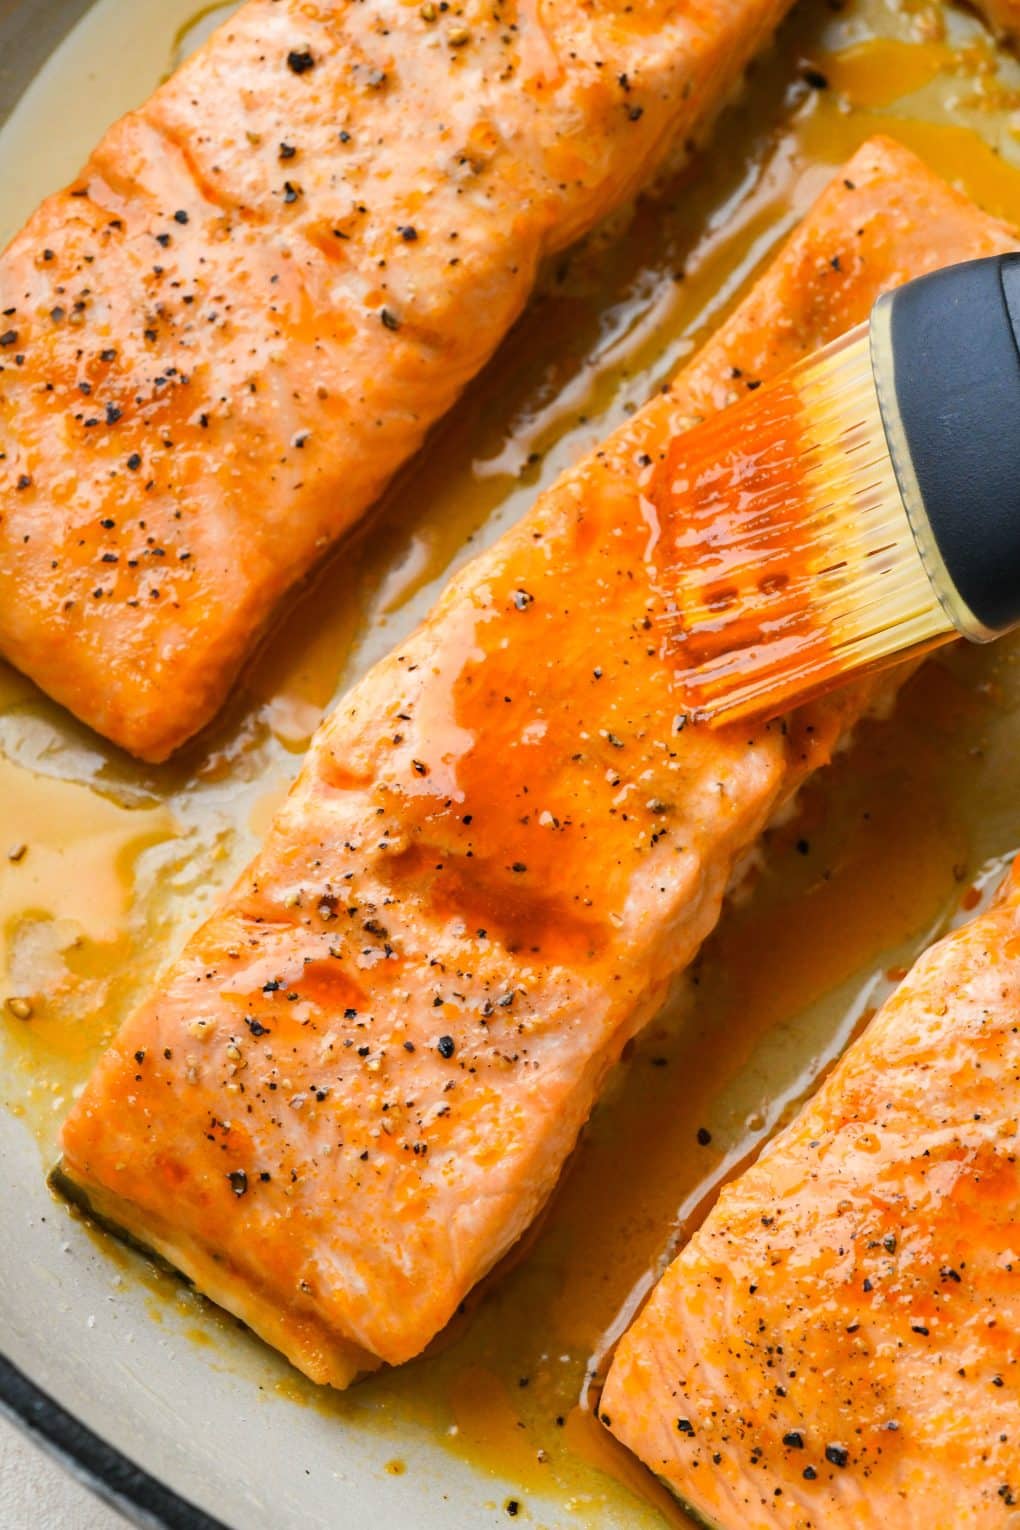 How to make baked buffalo salmon: Brushing extra buffalo sauce over partially baked salmon fillets.